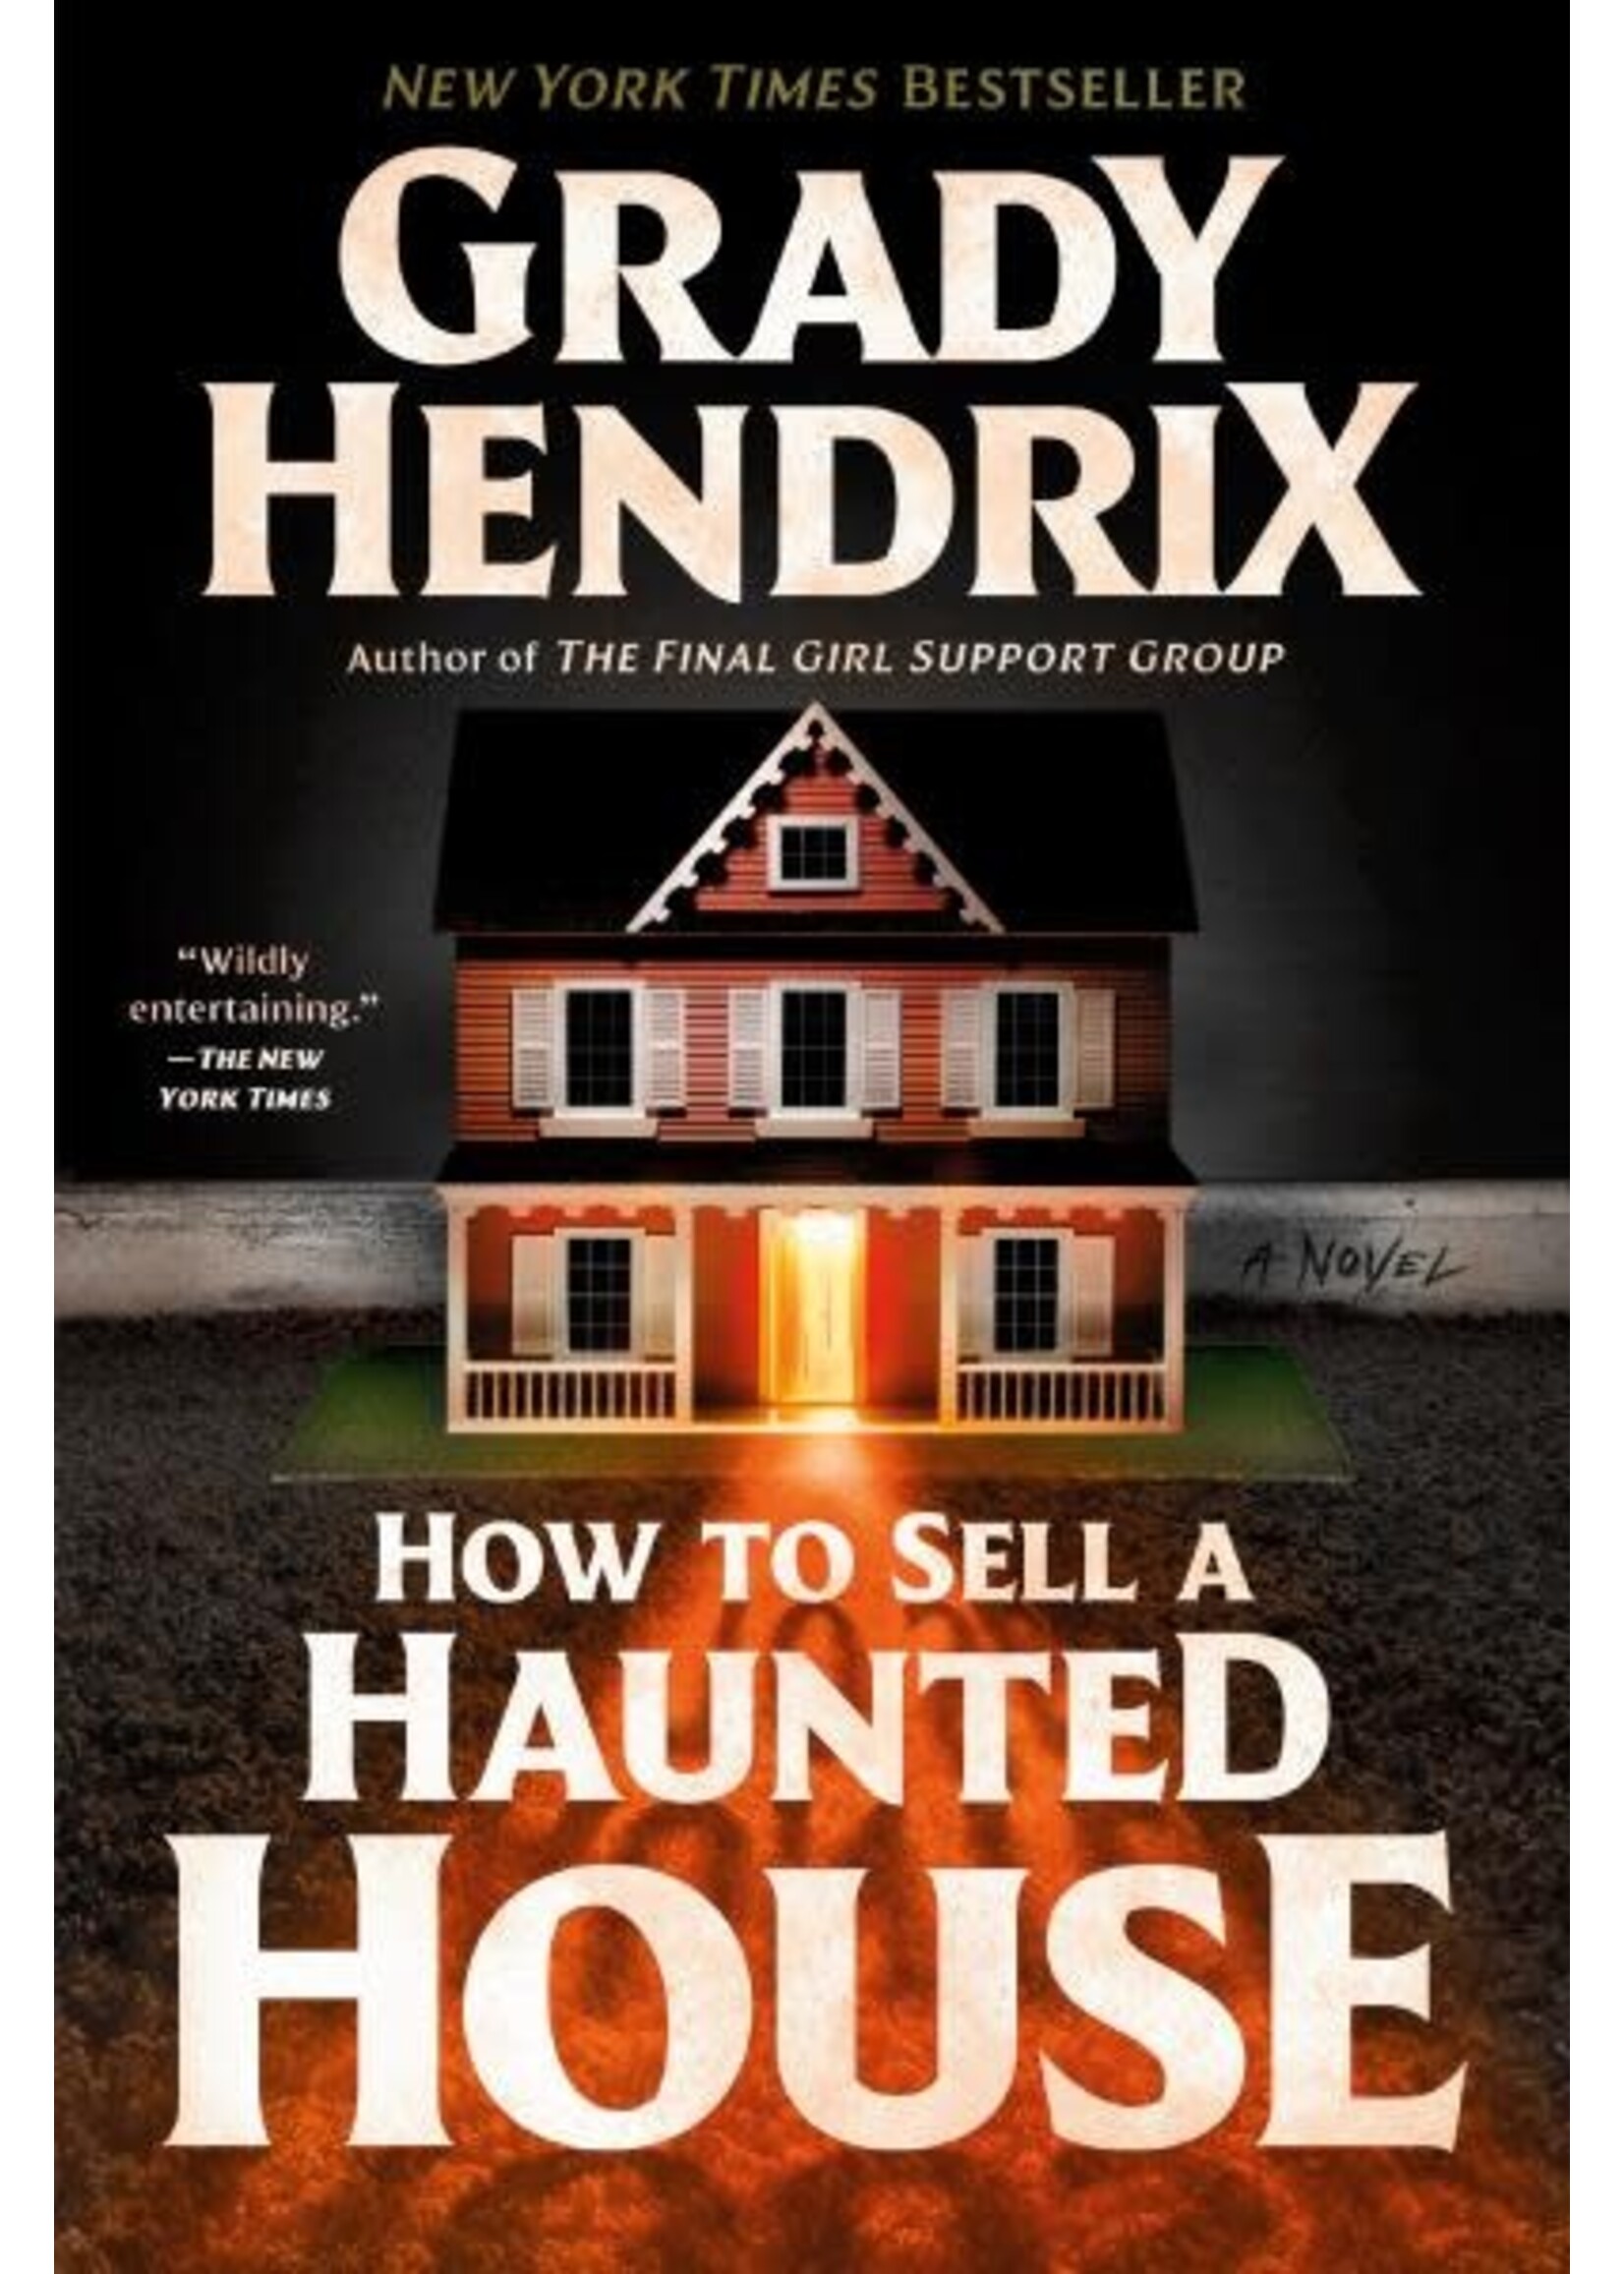 How to Sell a Haunted House by Grady Hendrix